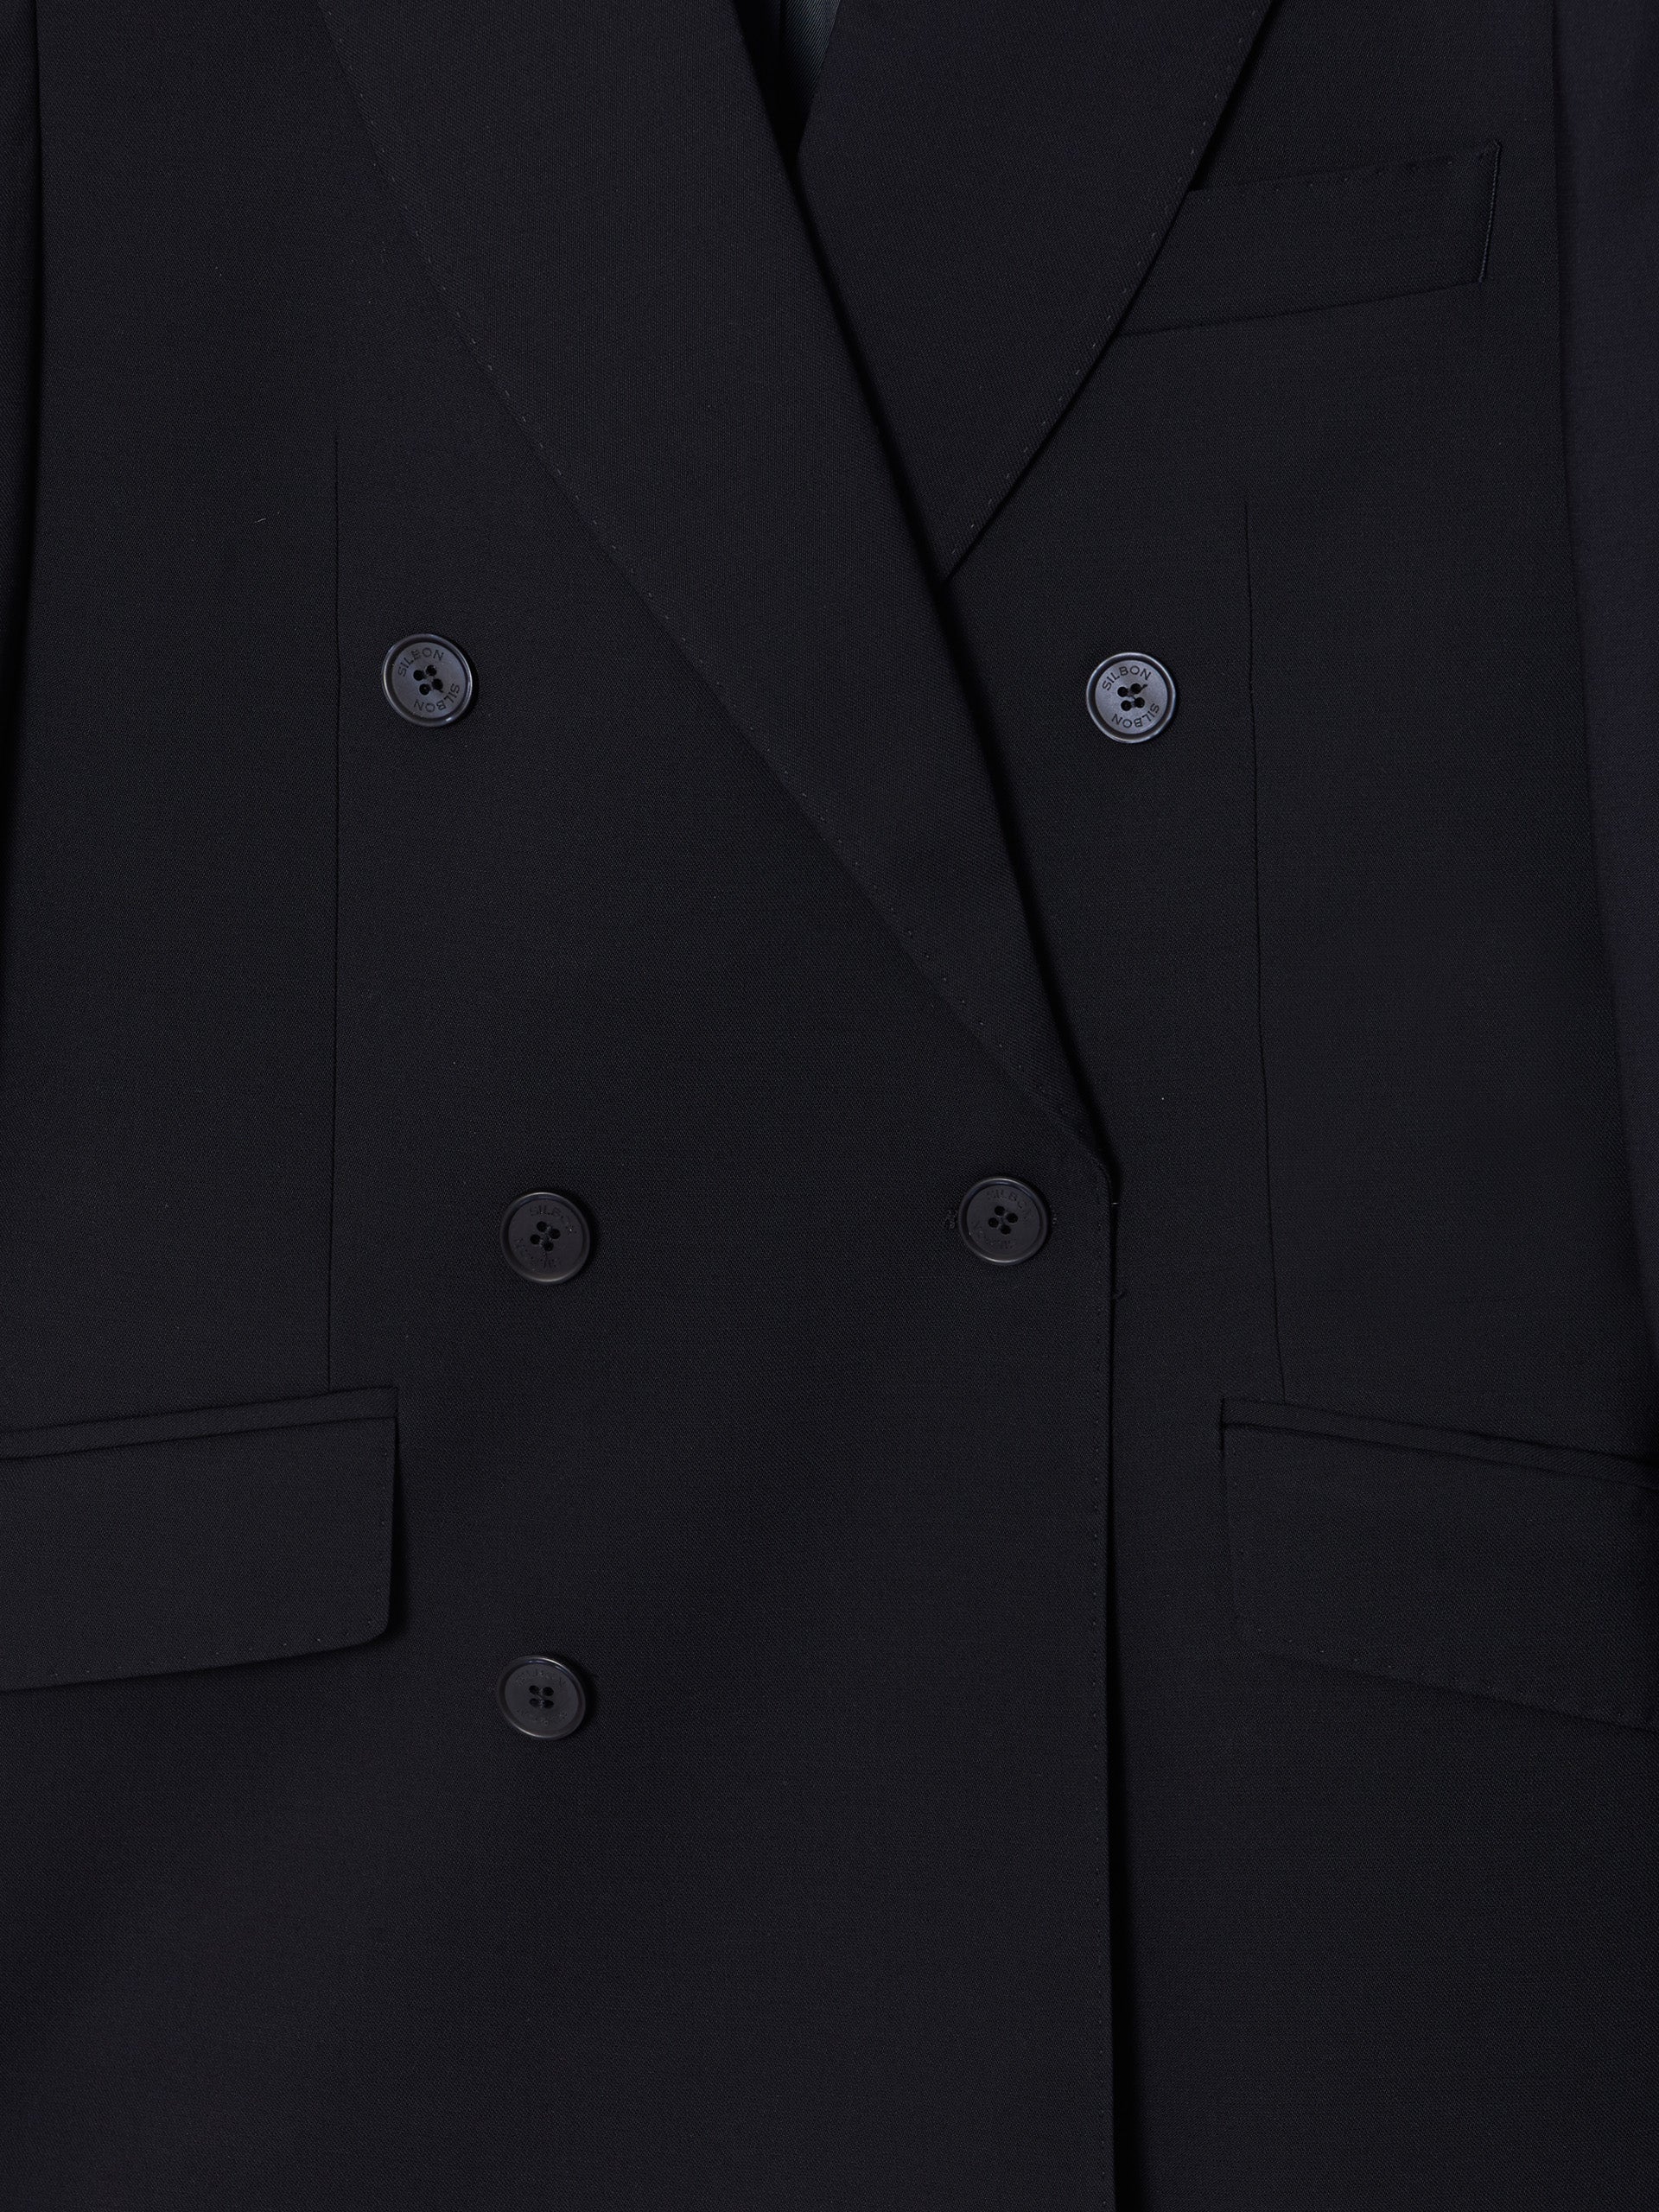 Navy blue stretch double-breasted suit jacket